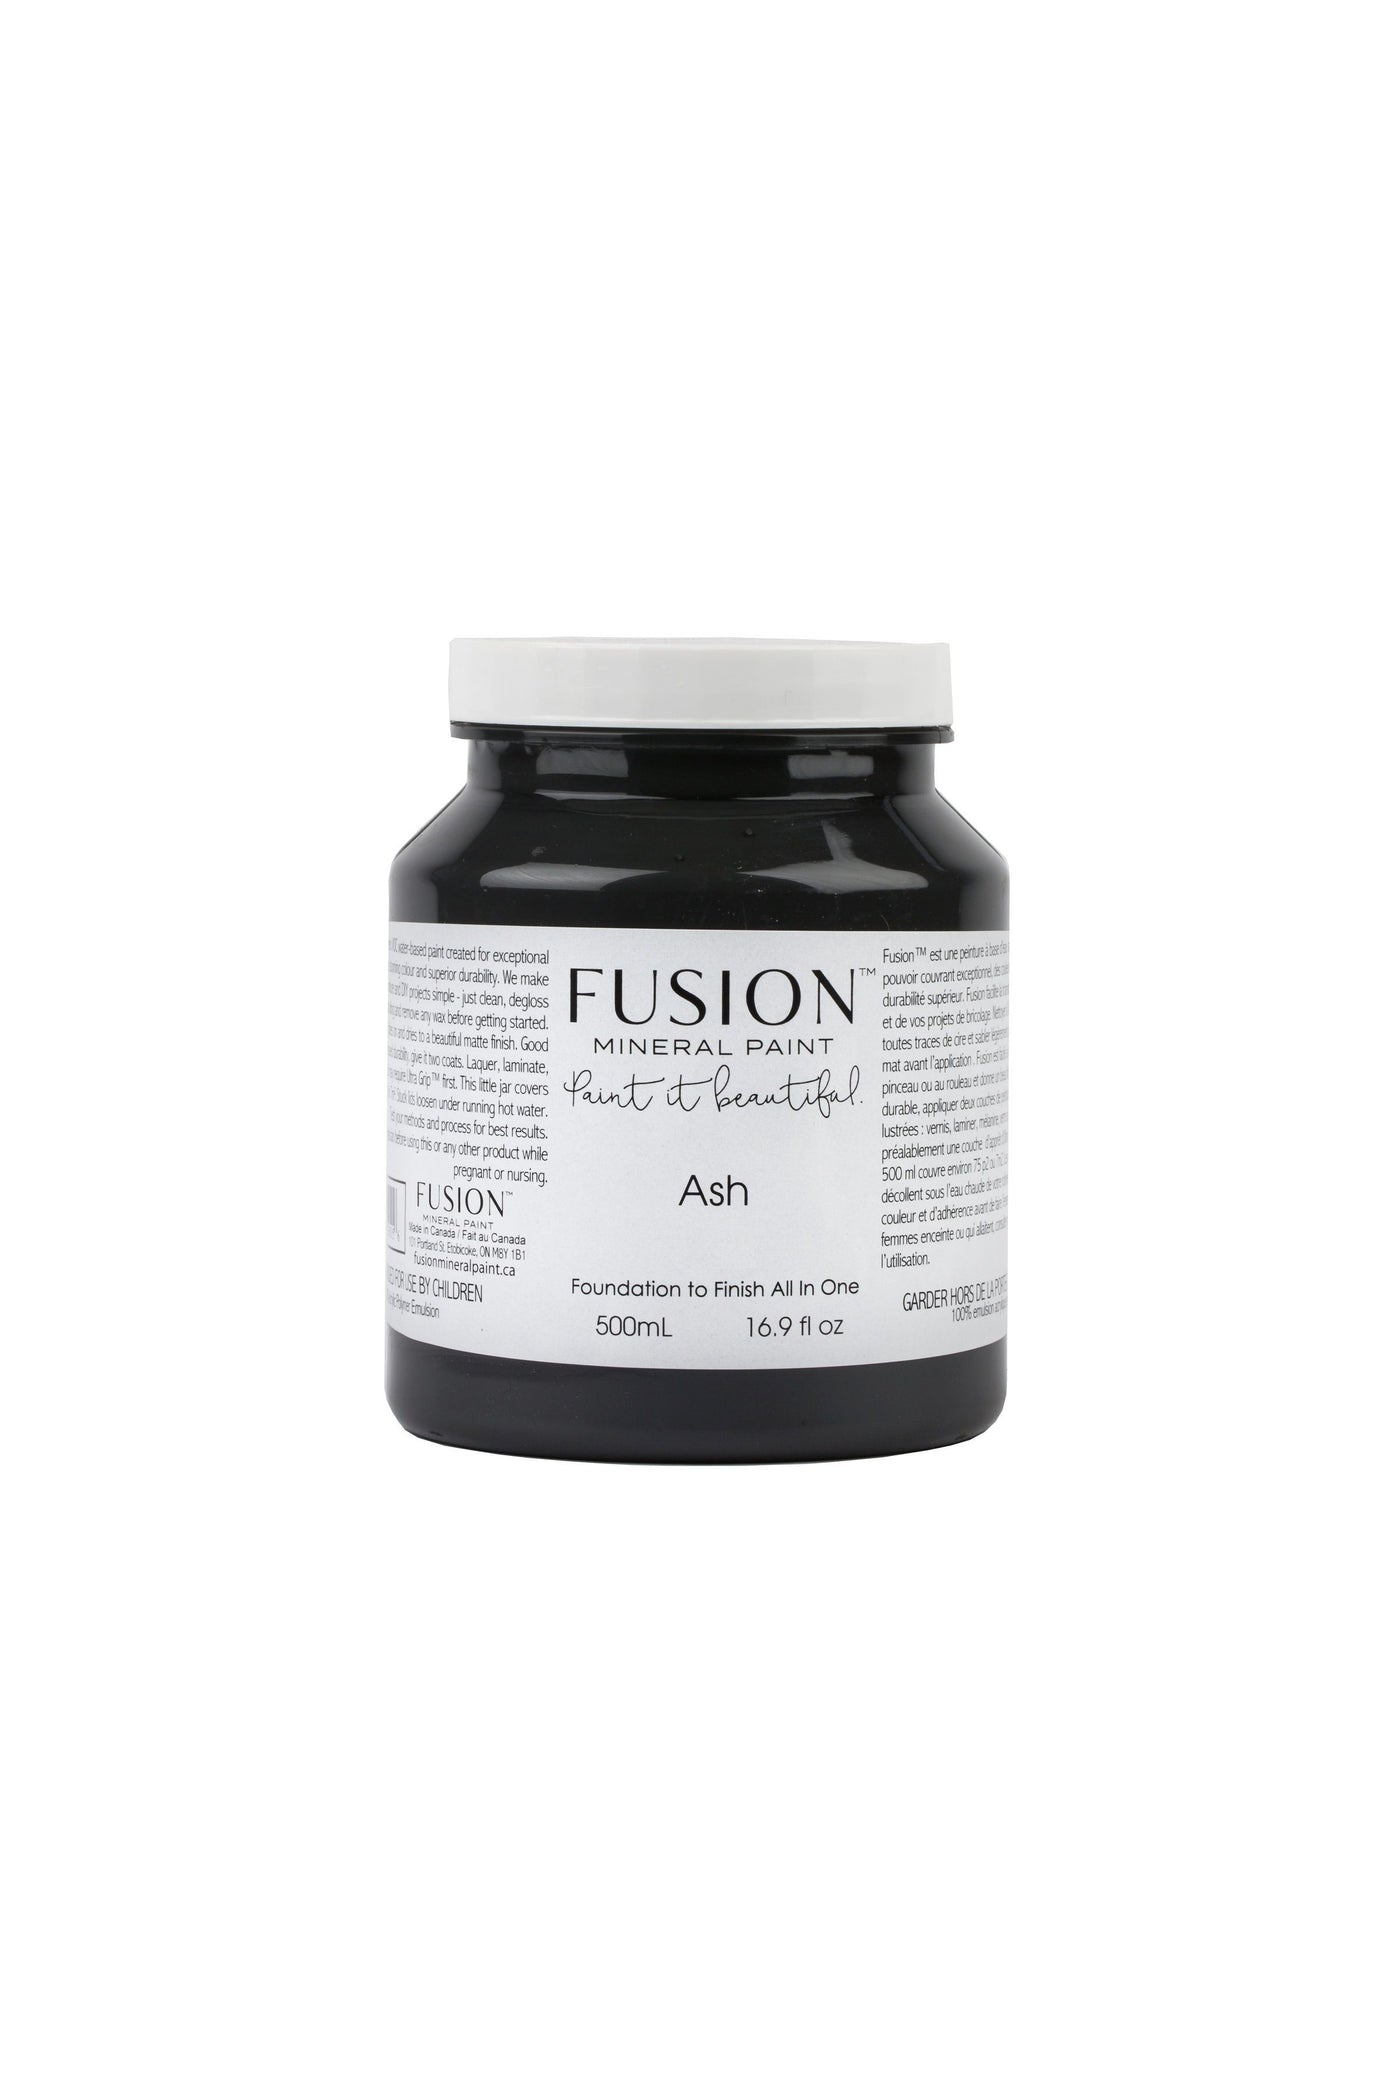 Ash Fusion Mineral Paint 500ml size For the Love Creations